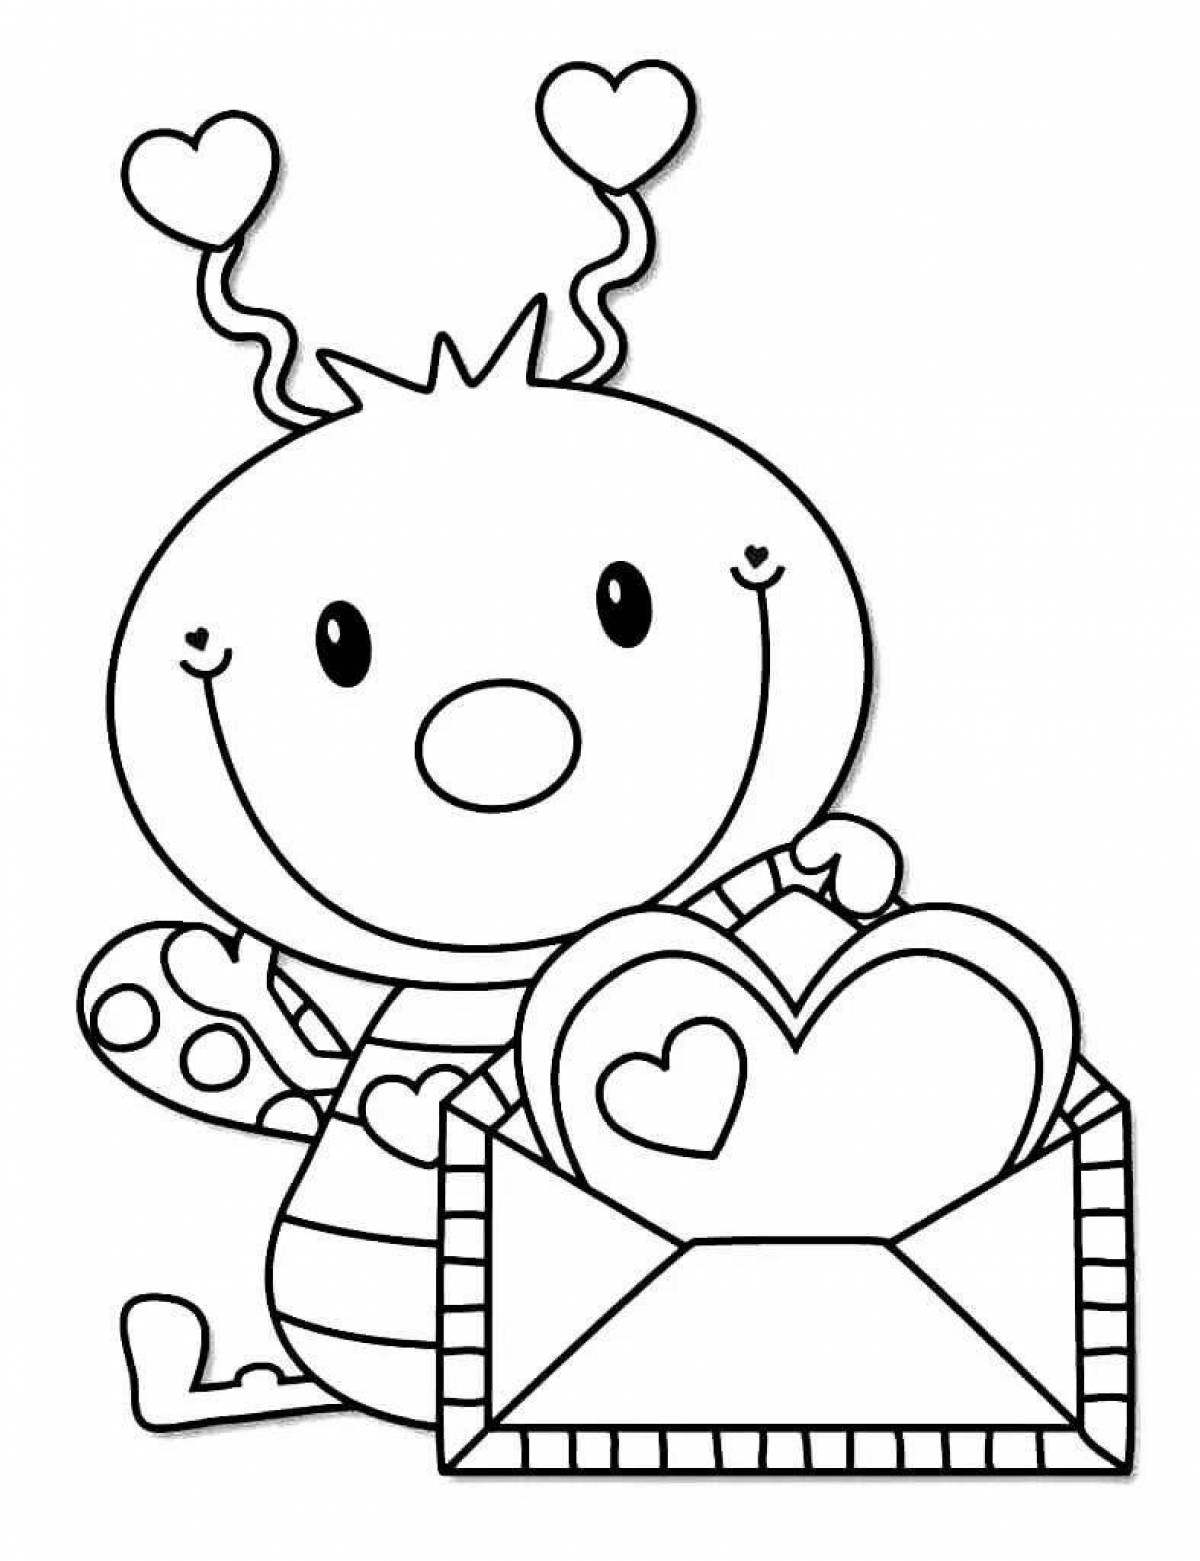 February 14th valentine's crazy coloring book